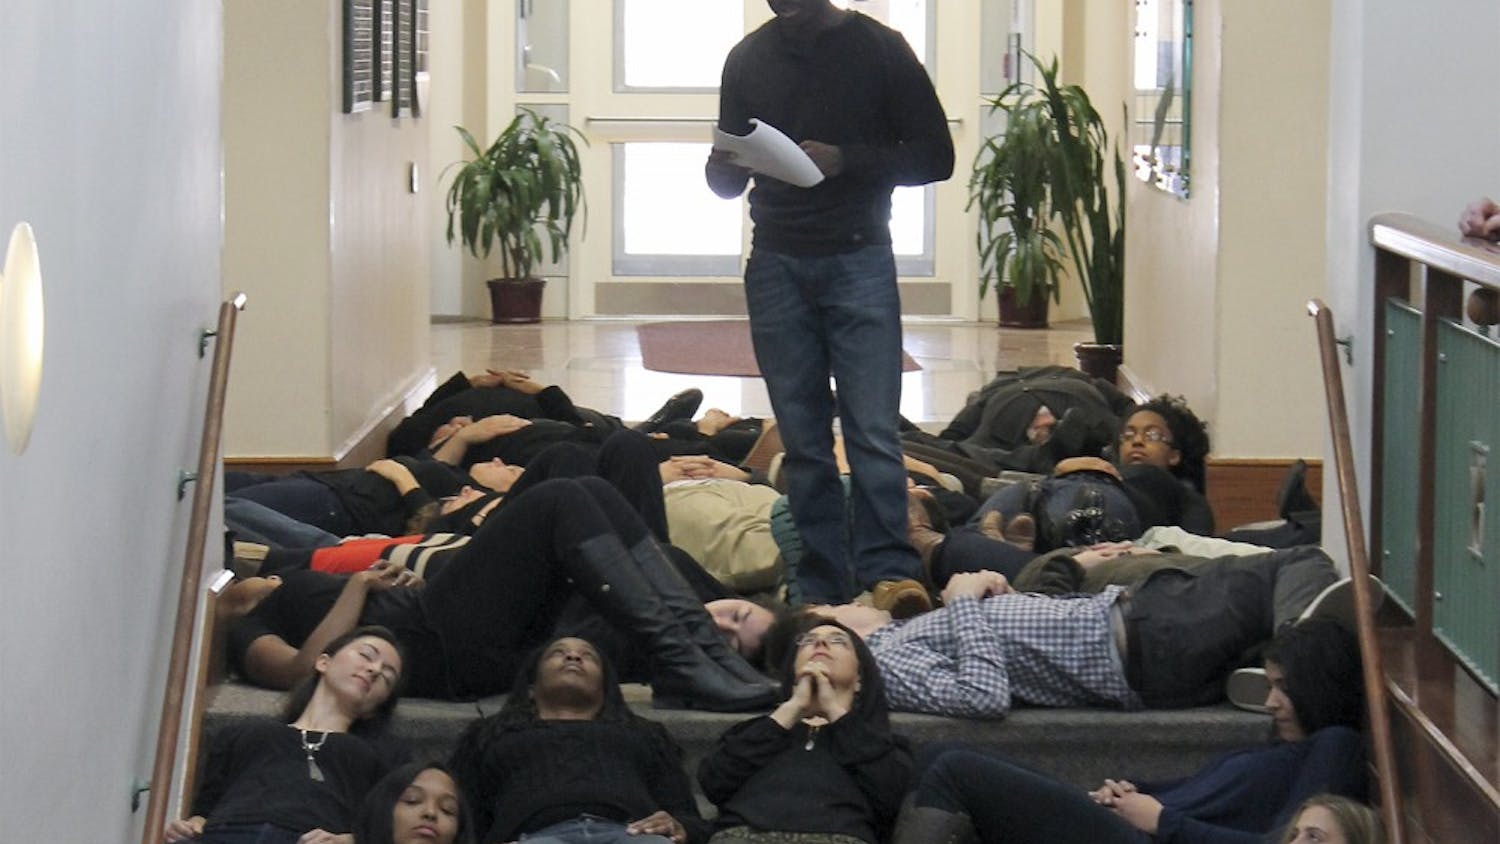 Joseph Bishop leads fellow law school students in a die-in to protest racial bias.